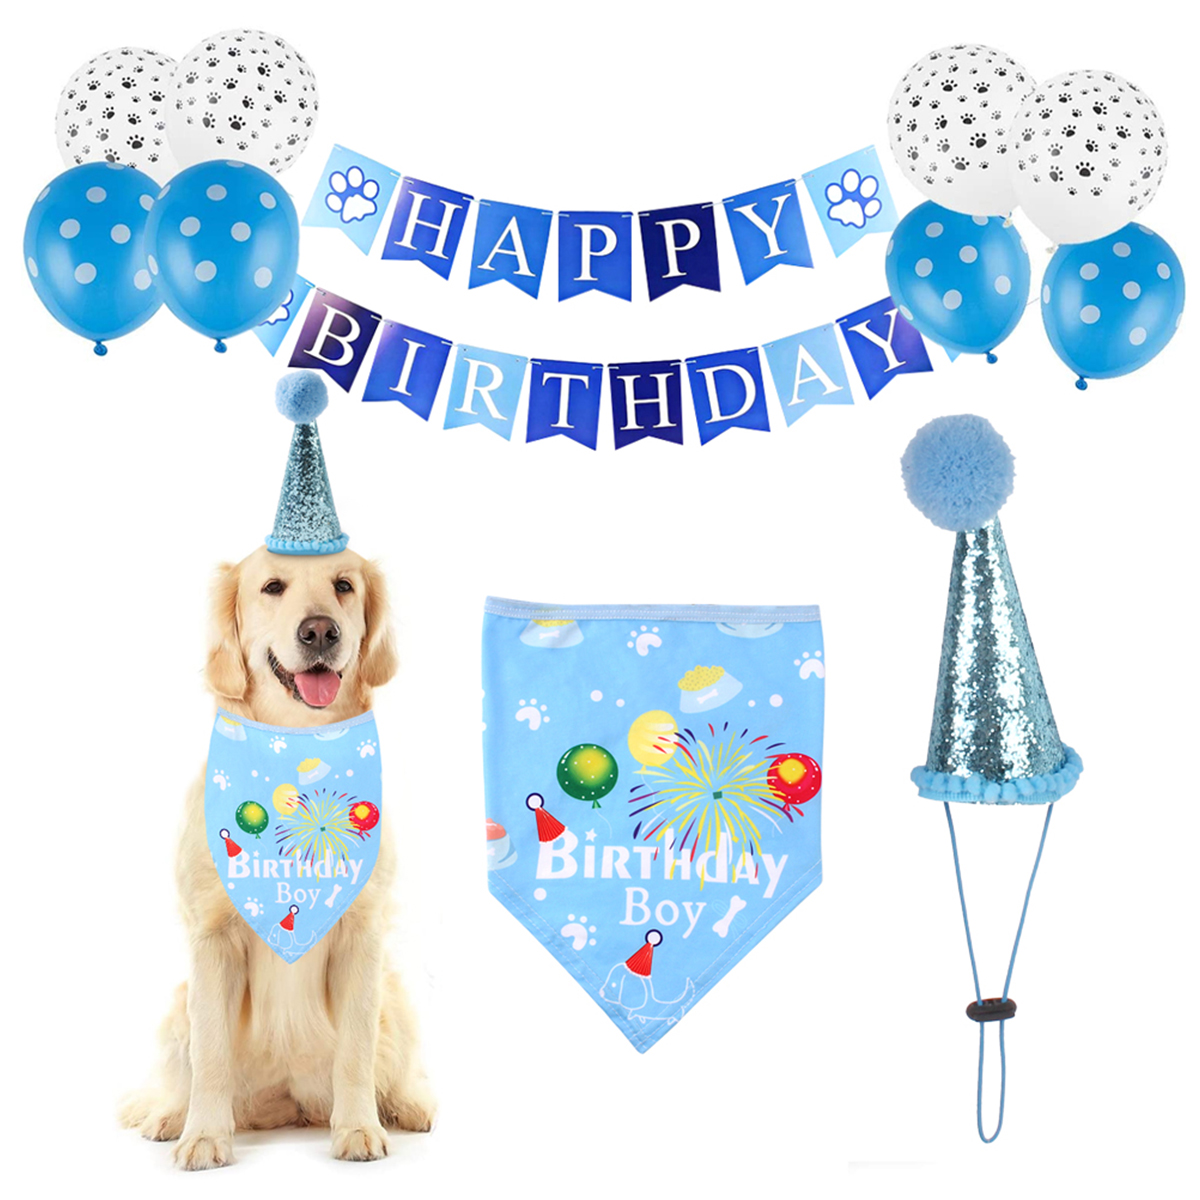 Details about   x2 Personalised Birthday Banner Hat Children Kids Party Decoration Poster